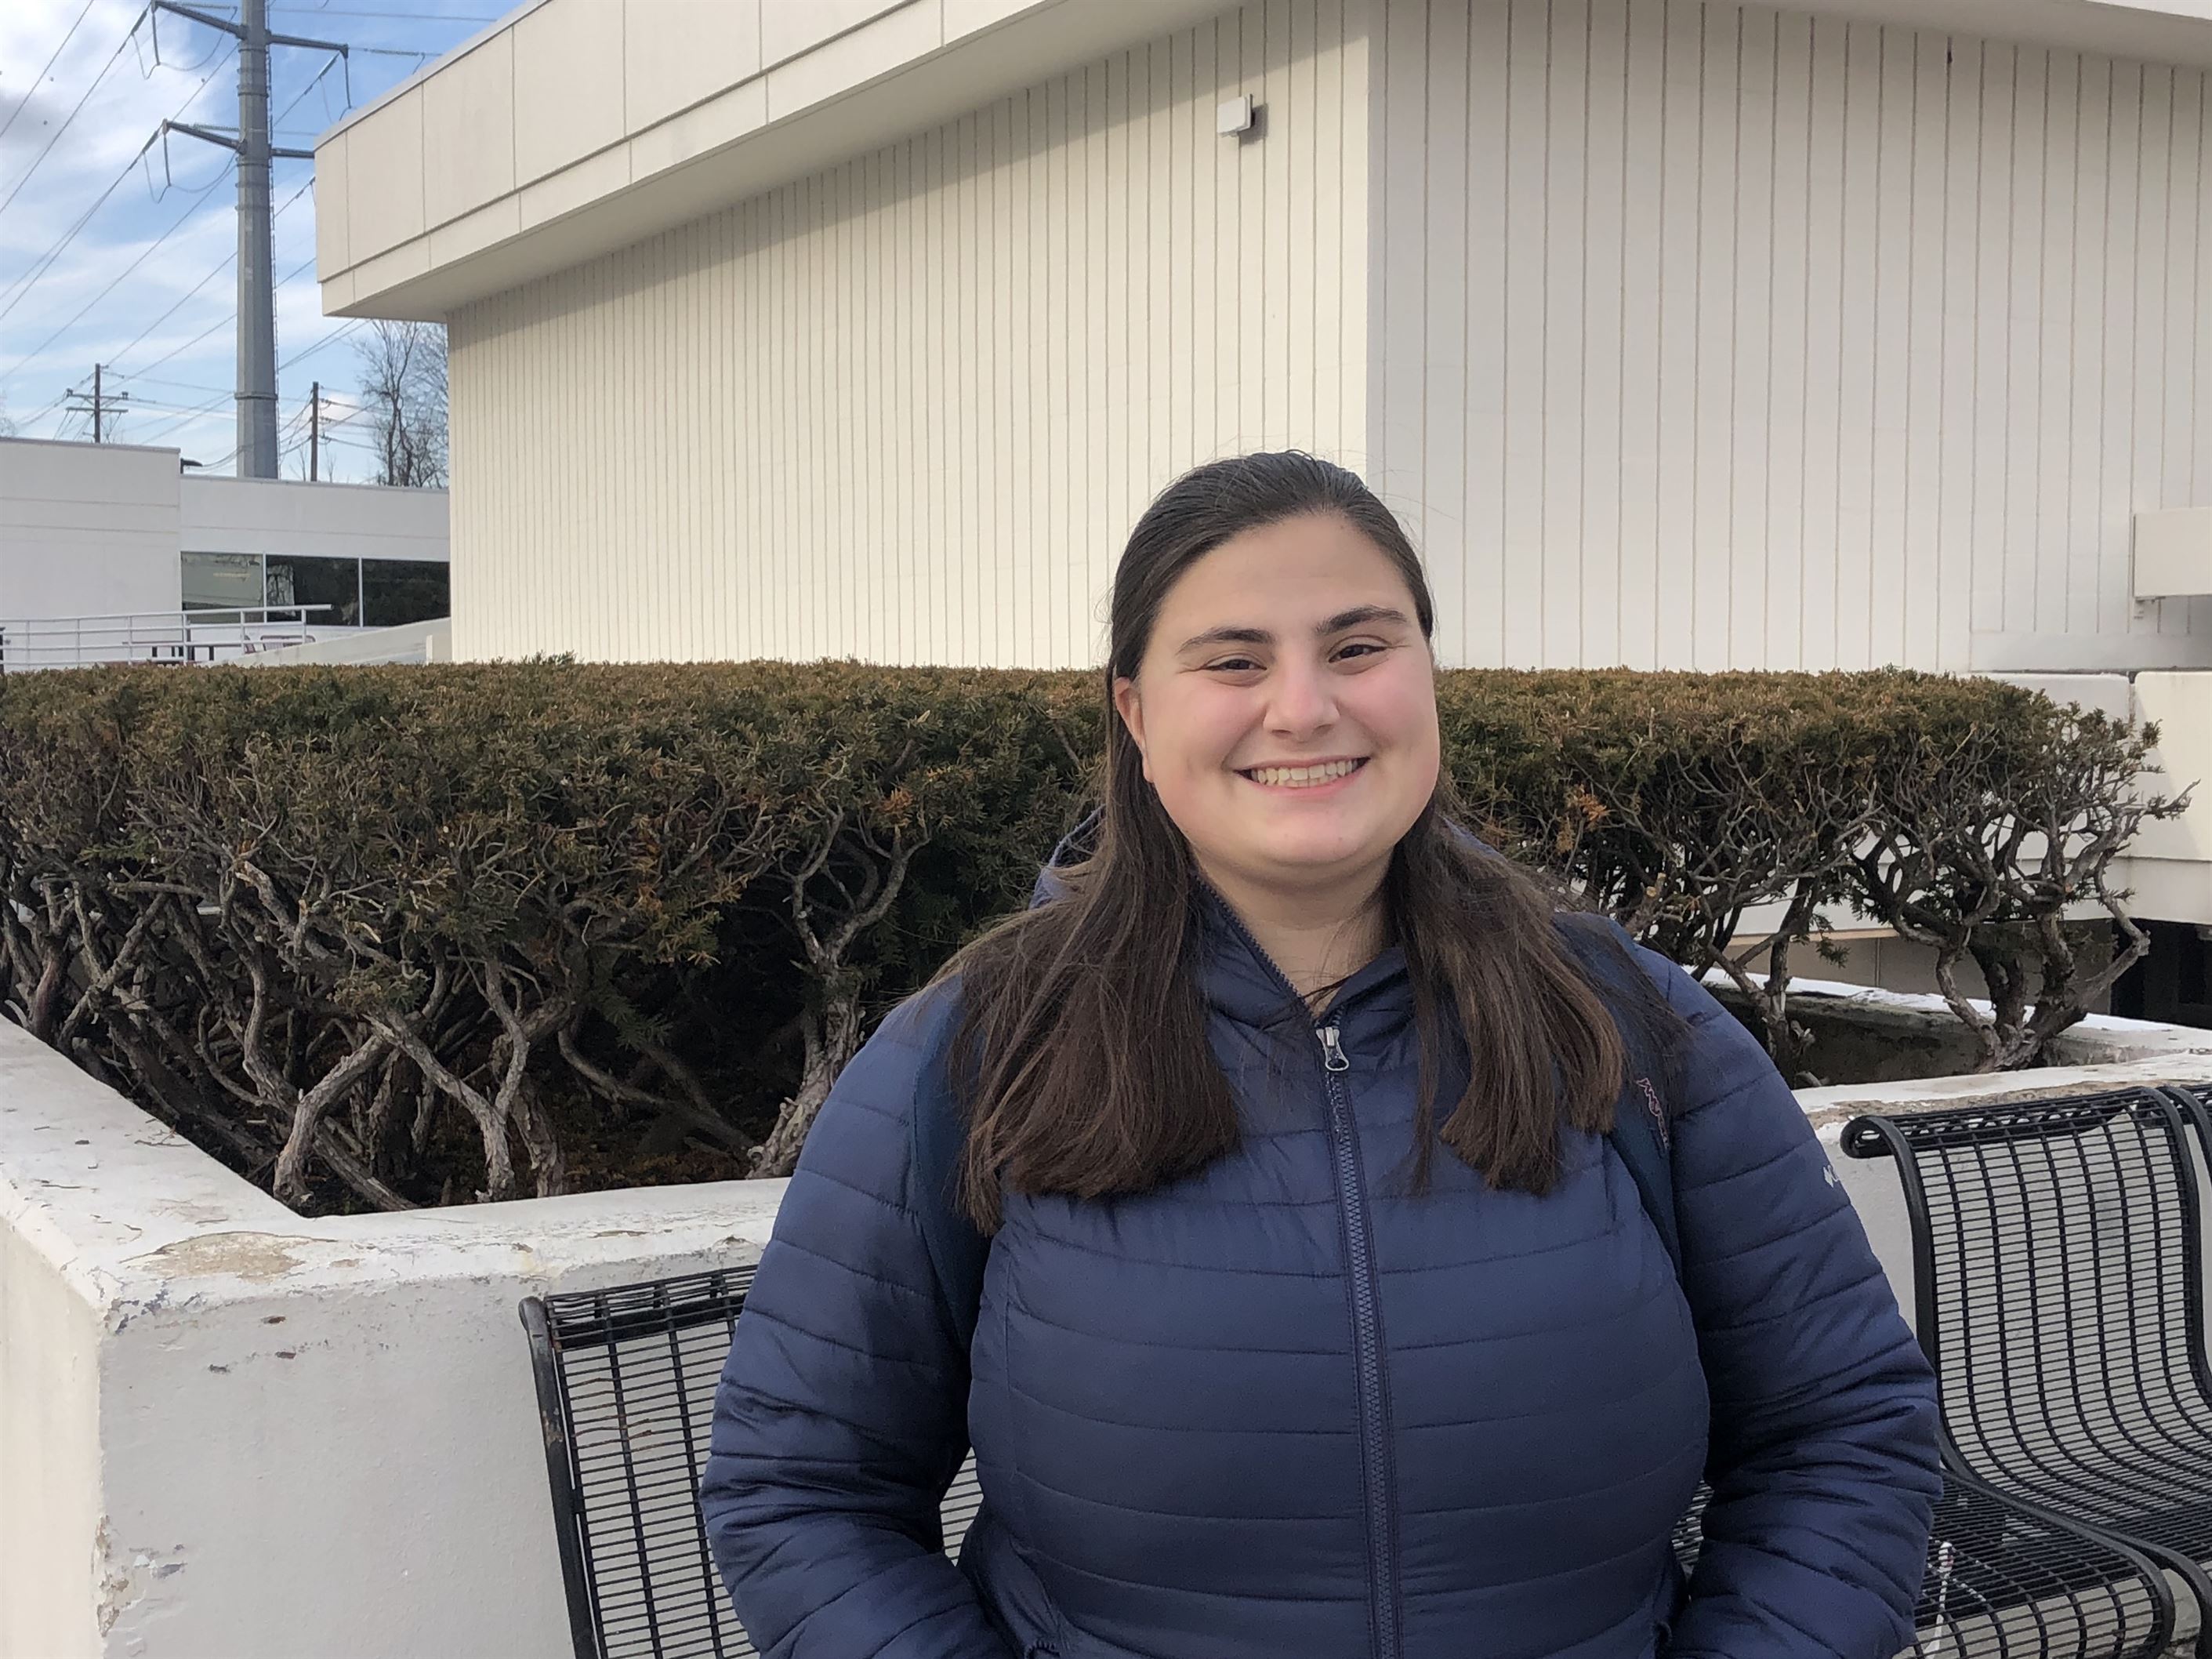 Juliana Vasile said her class is not enforcing social distancing. Jenna Sundel | The Montclarion